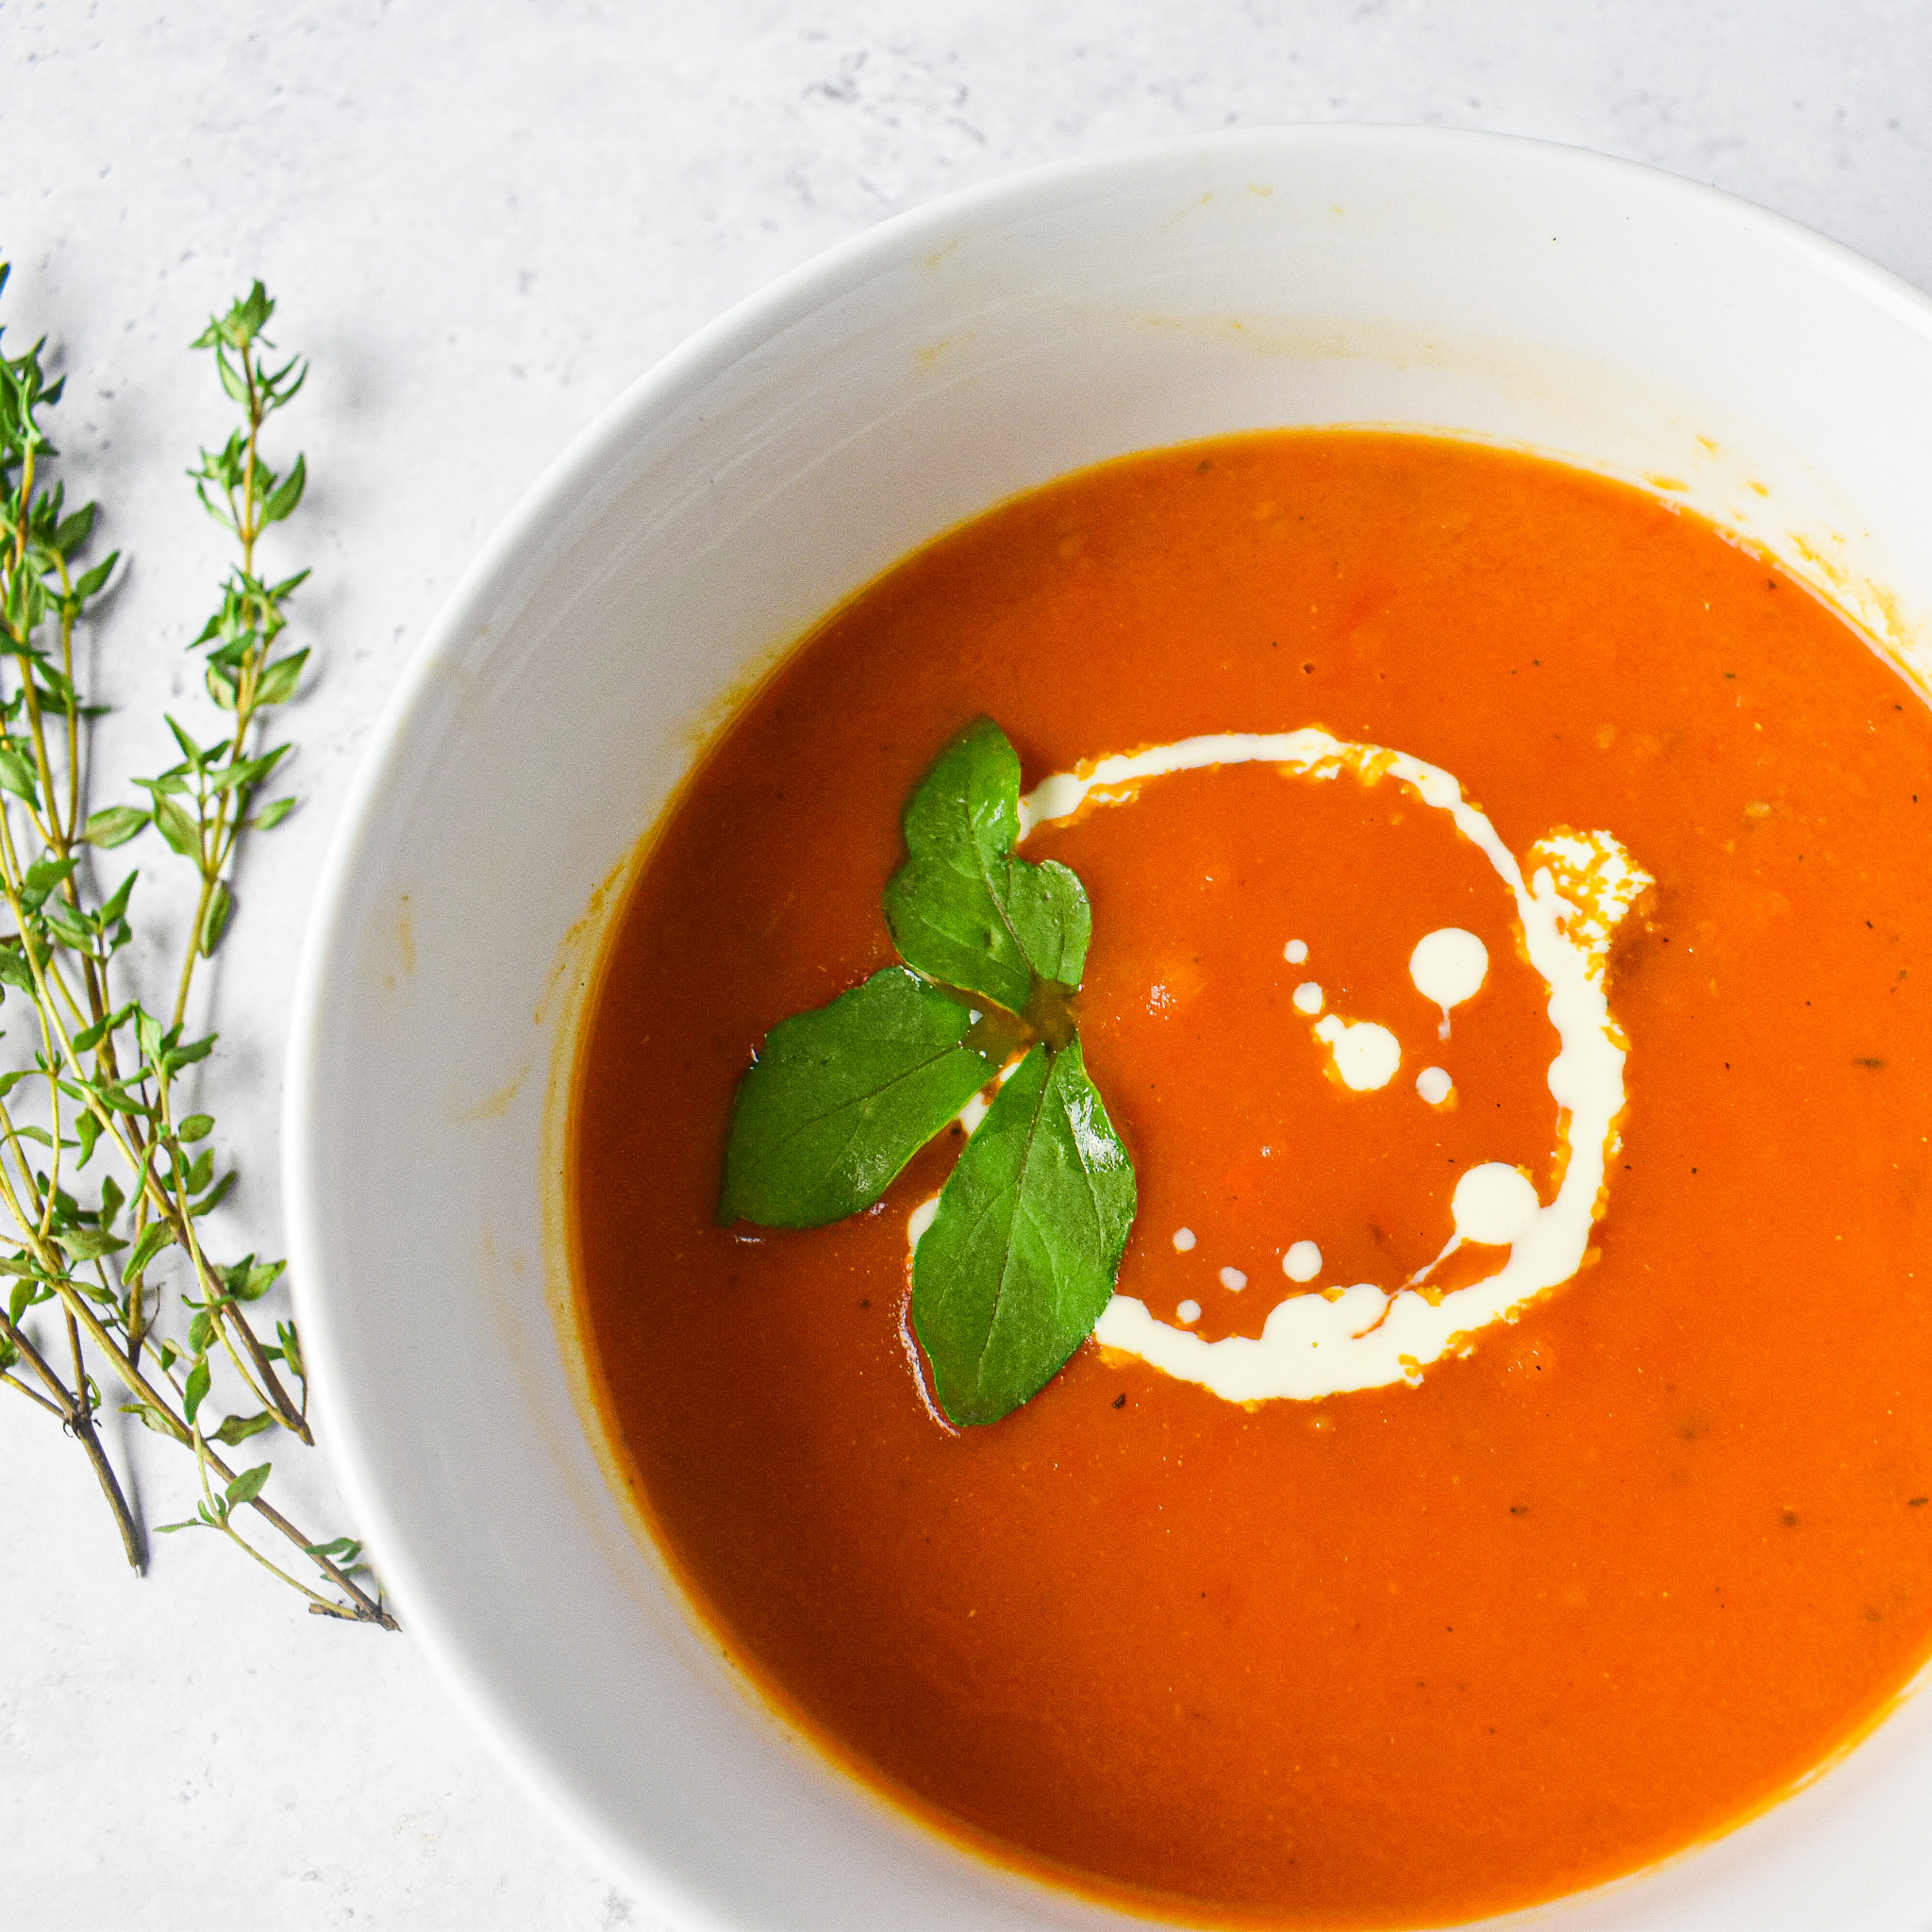 Creamy Tomato Soup with Thyme - Andrea's Dainty Kitchen